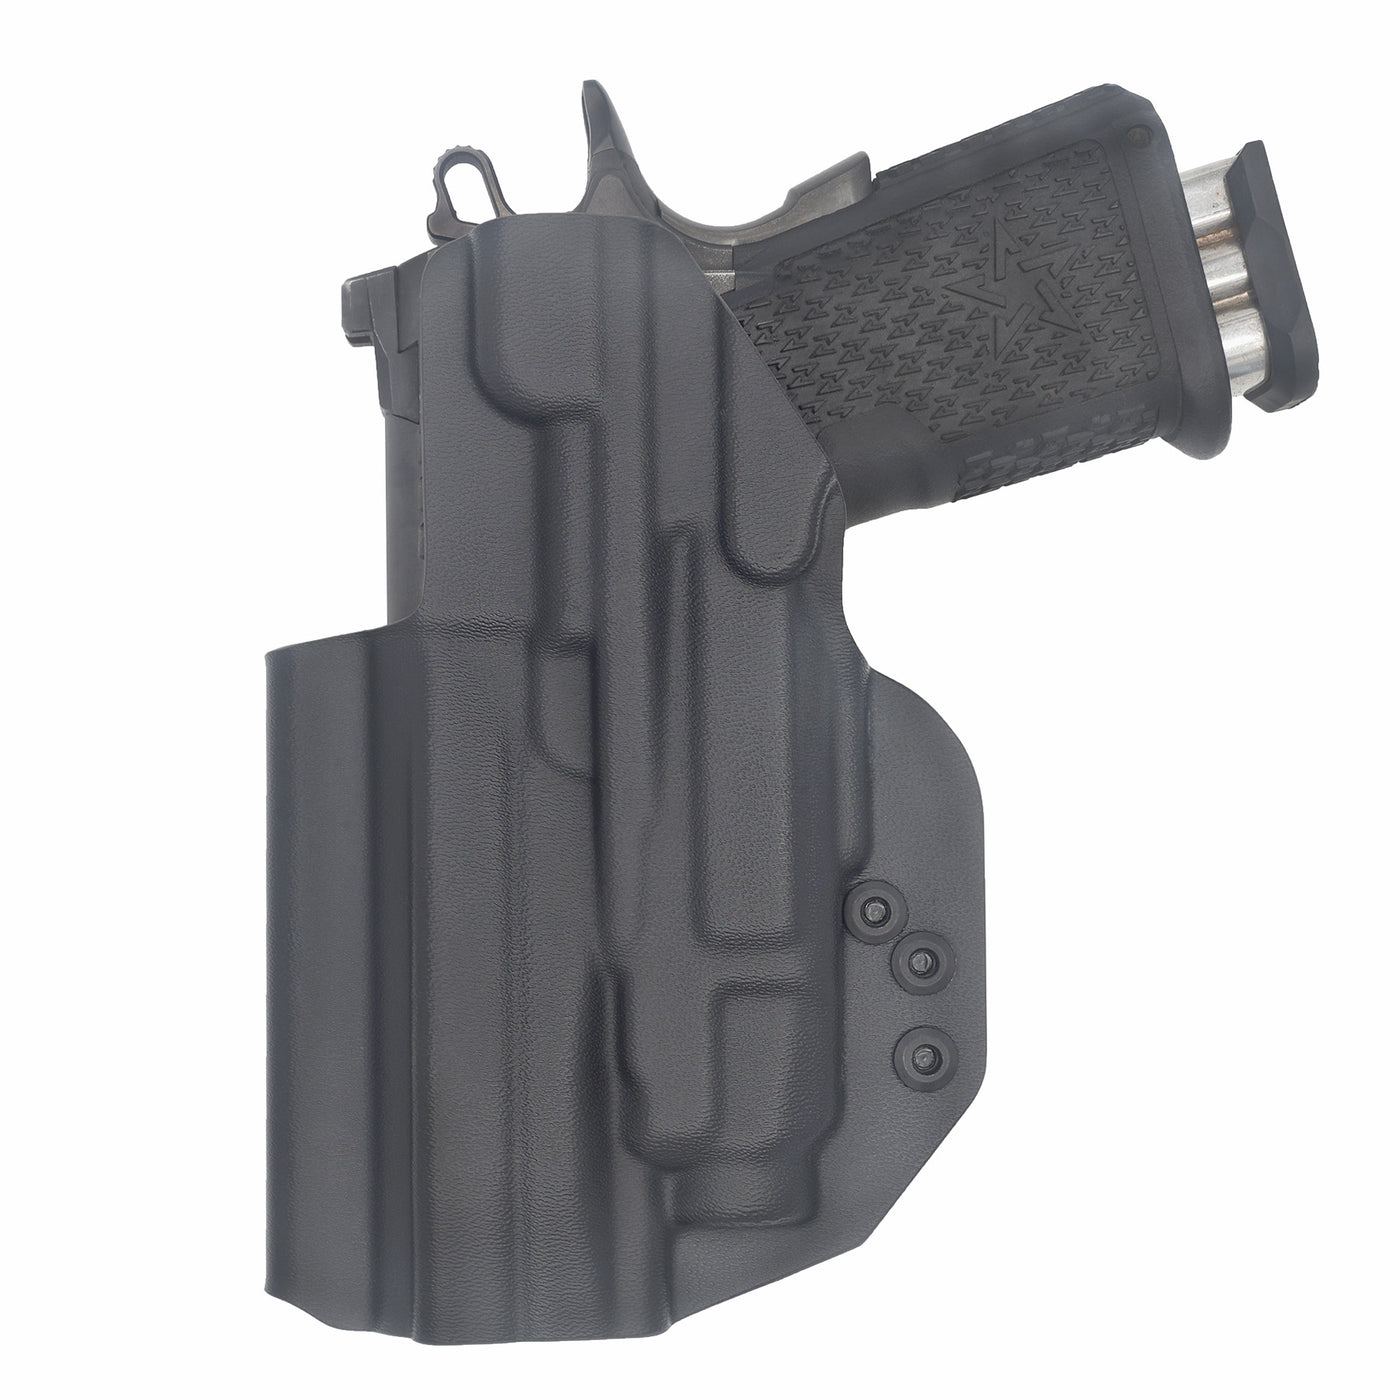 C&G Holsters Quickship IWB Tactical 2011 Streamlight TLR7/a in holstered position back view